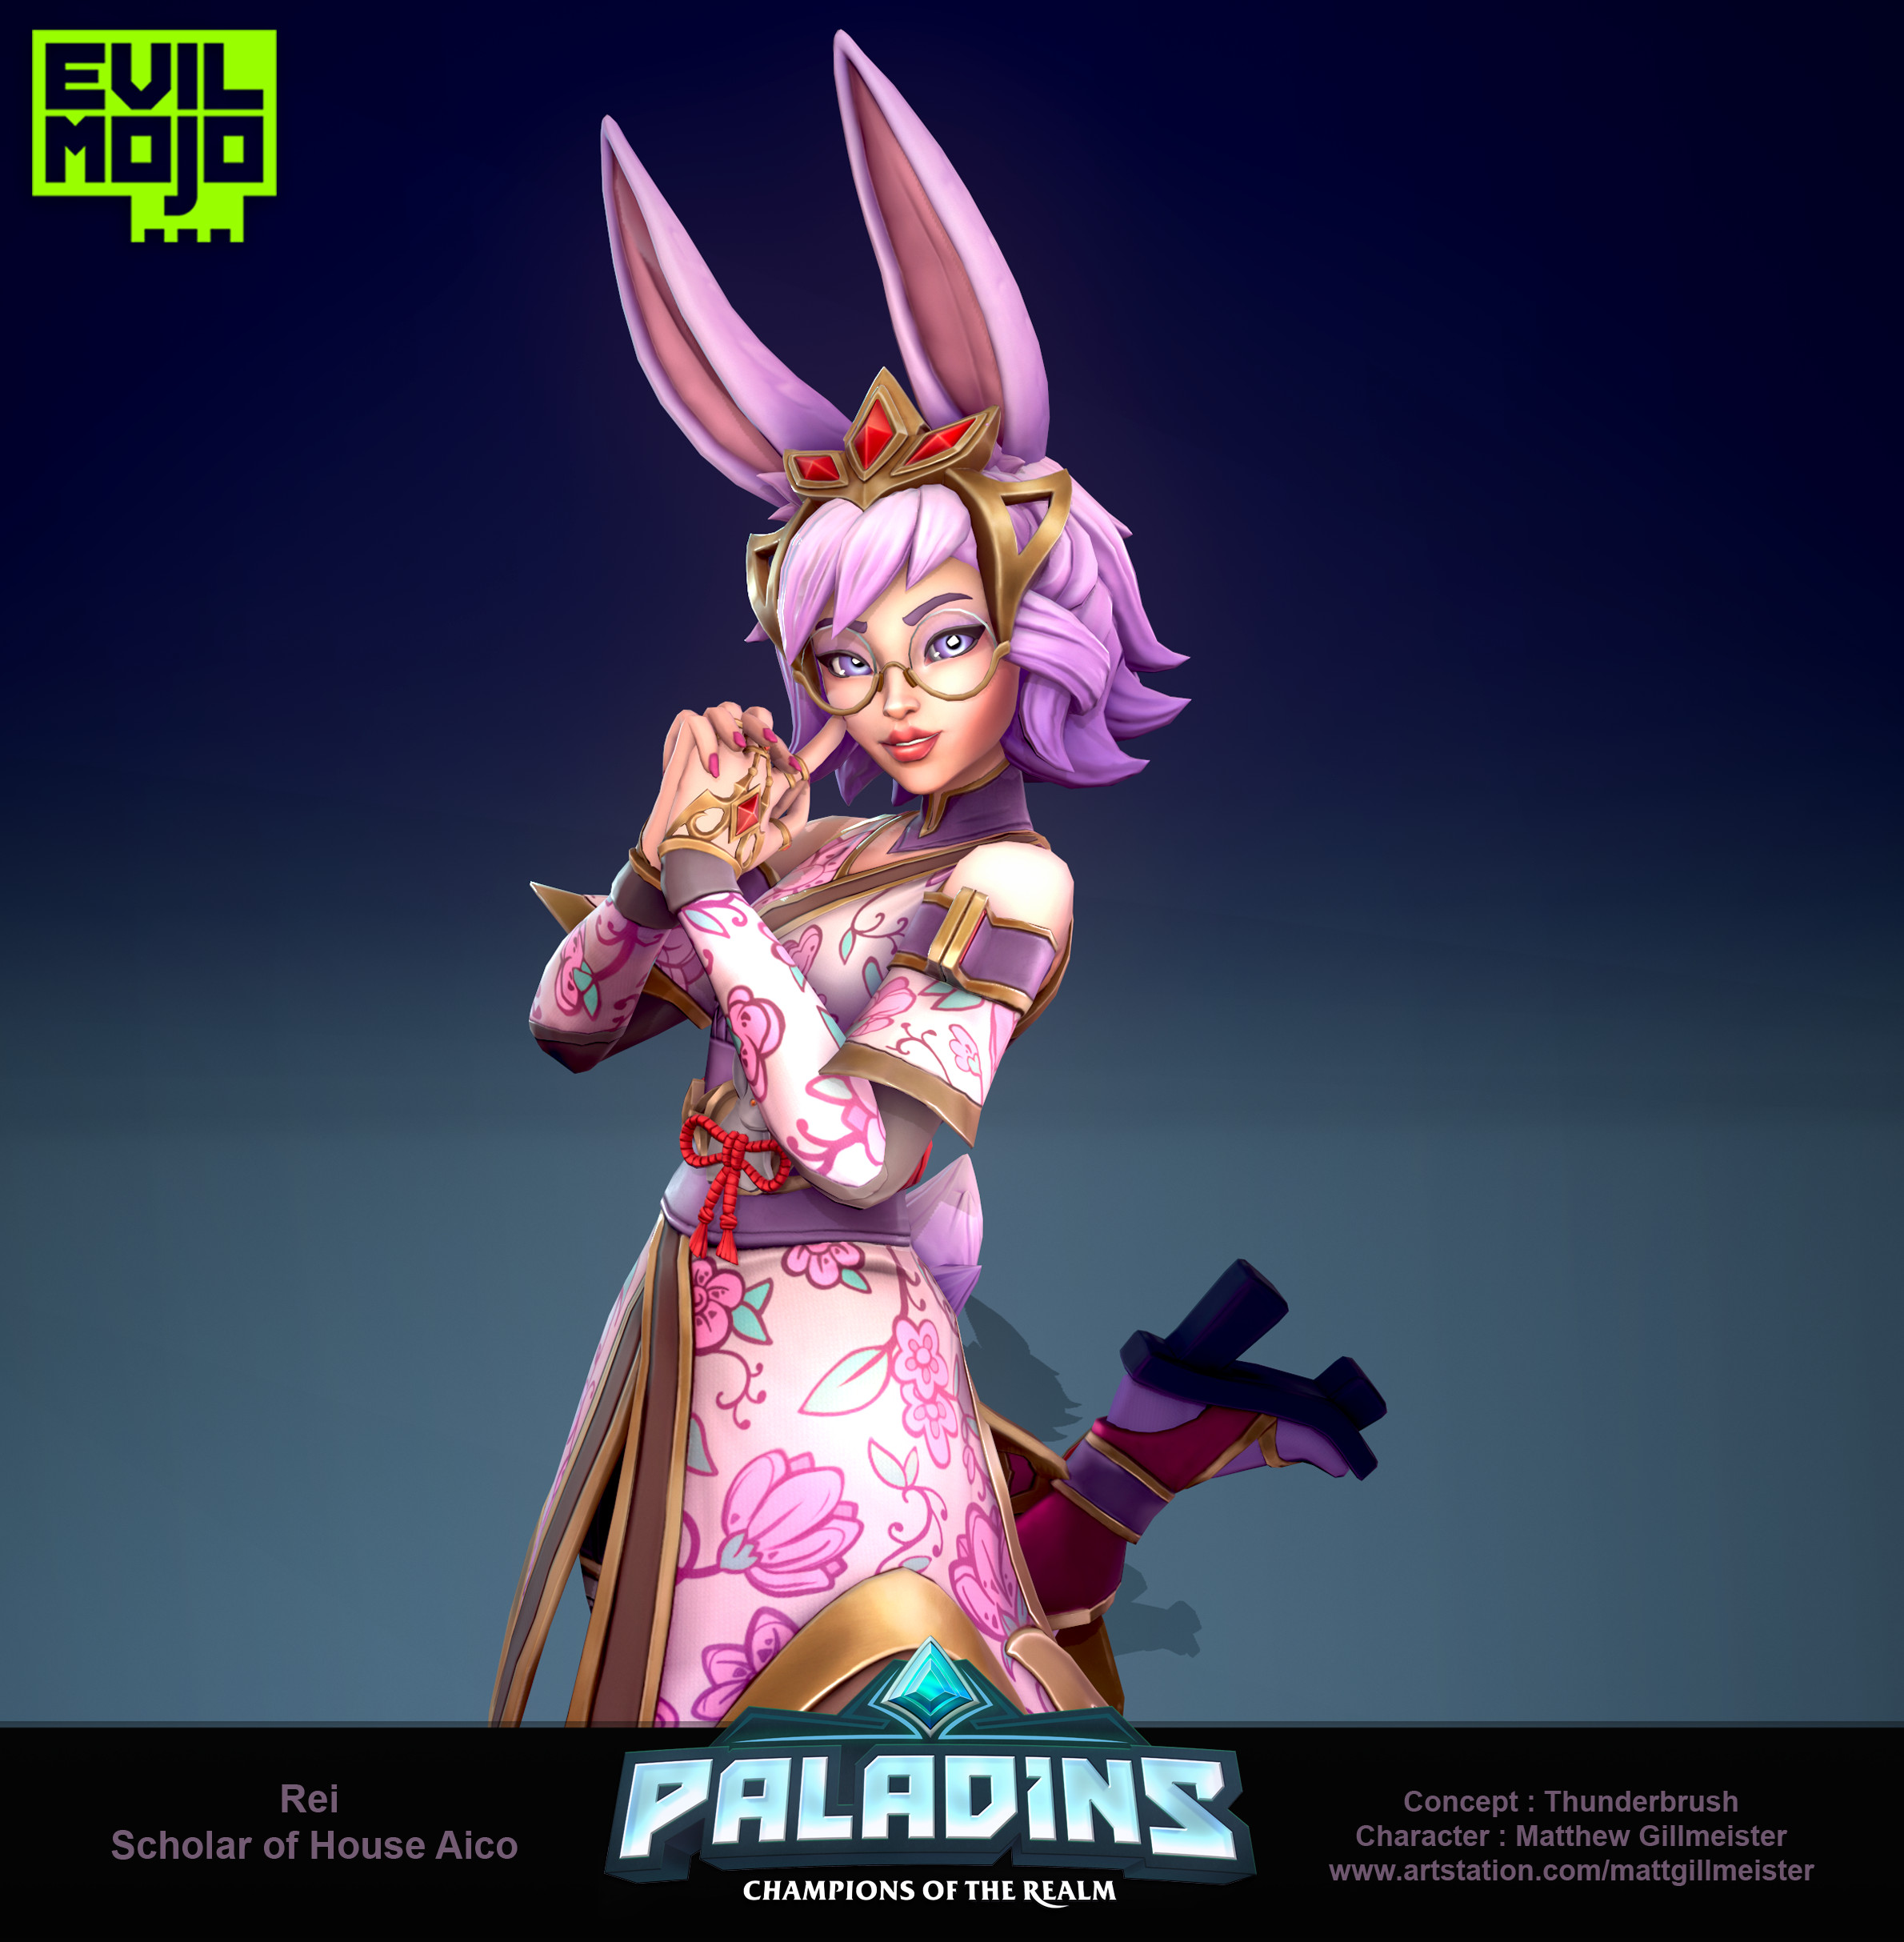 Paladins: Champions of the Realm - Lutris